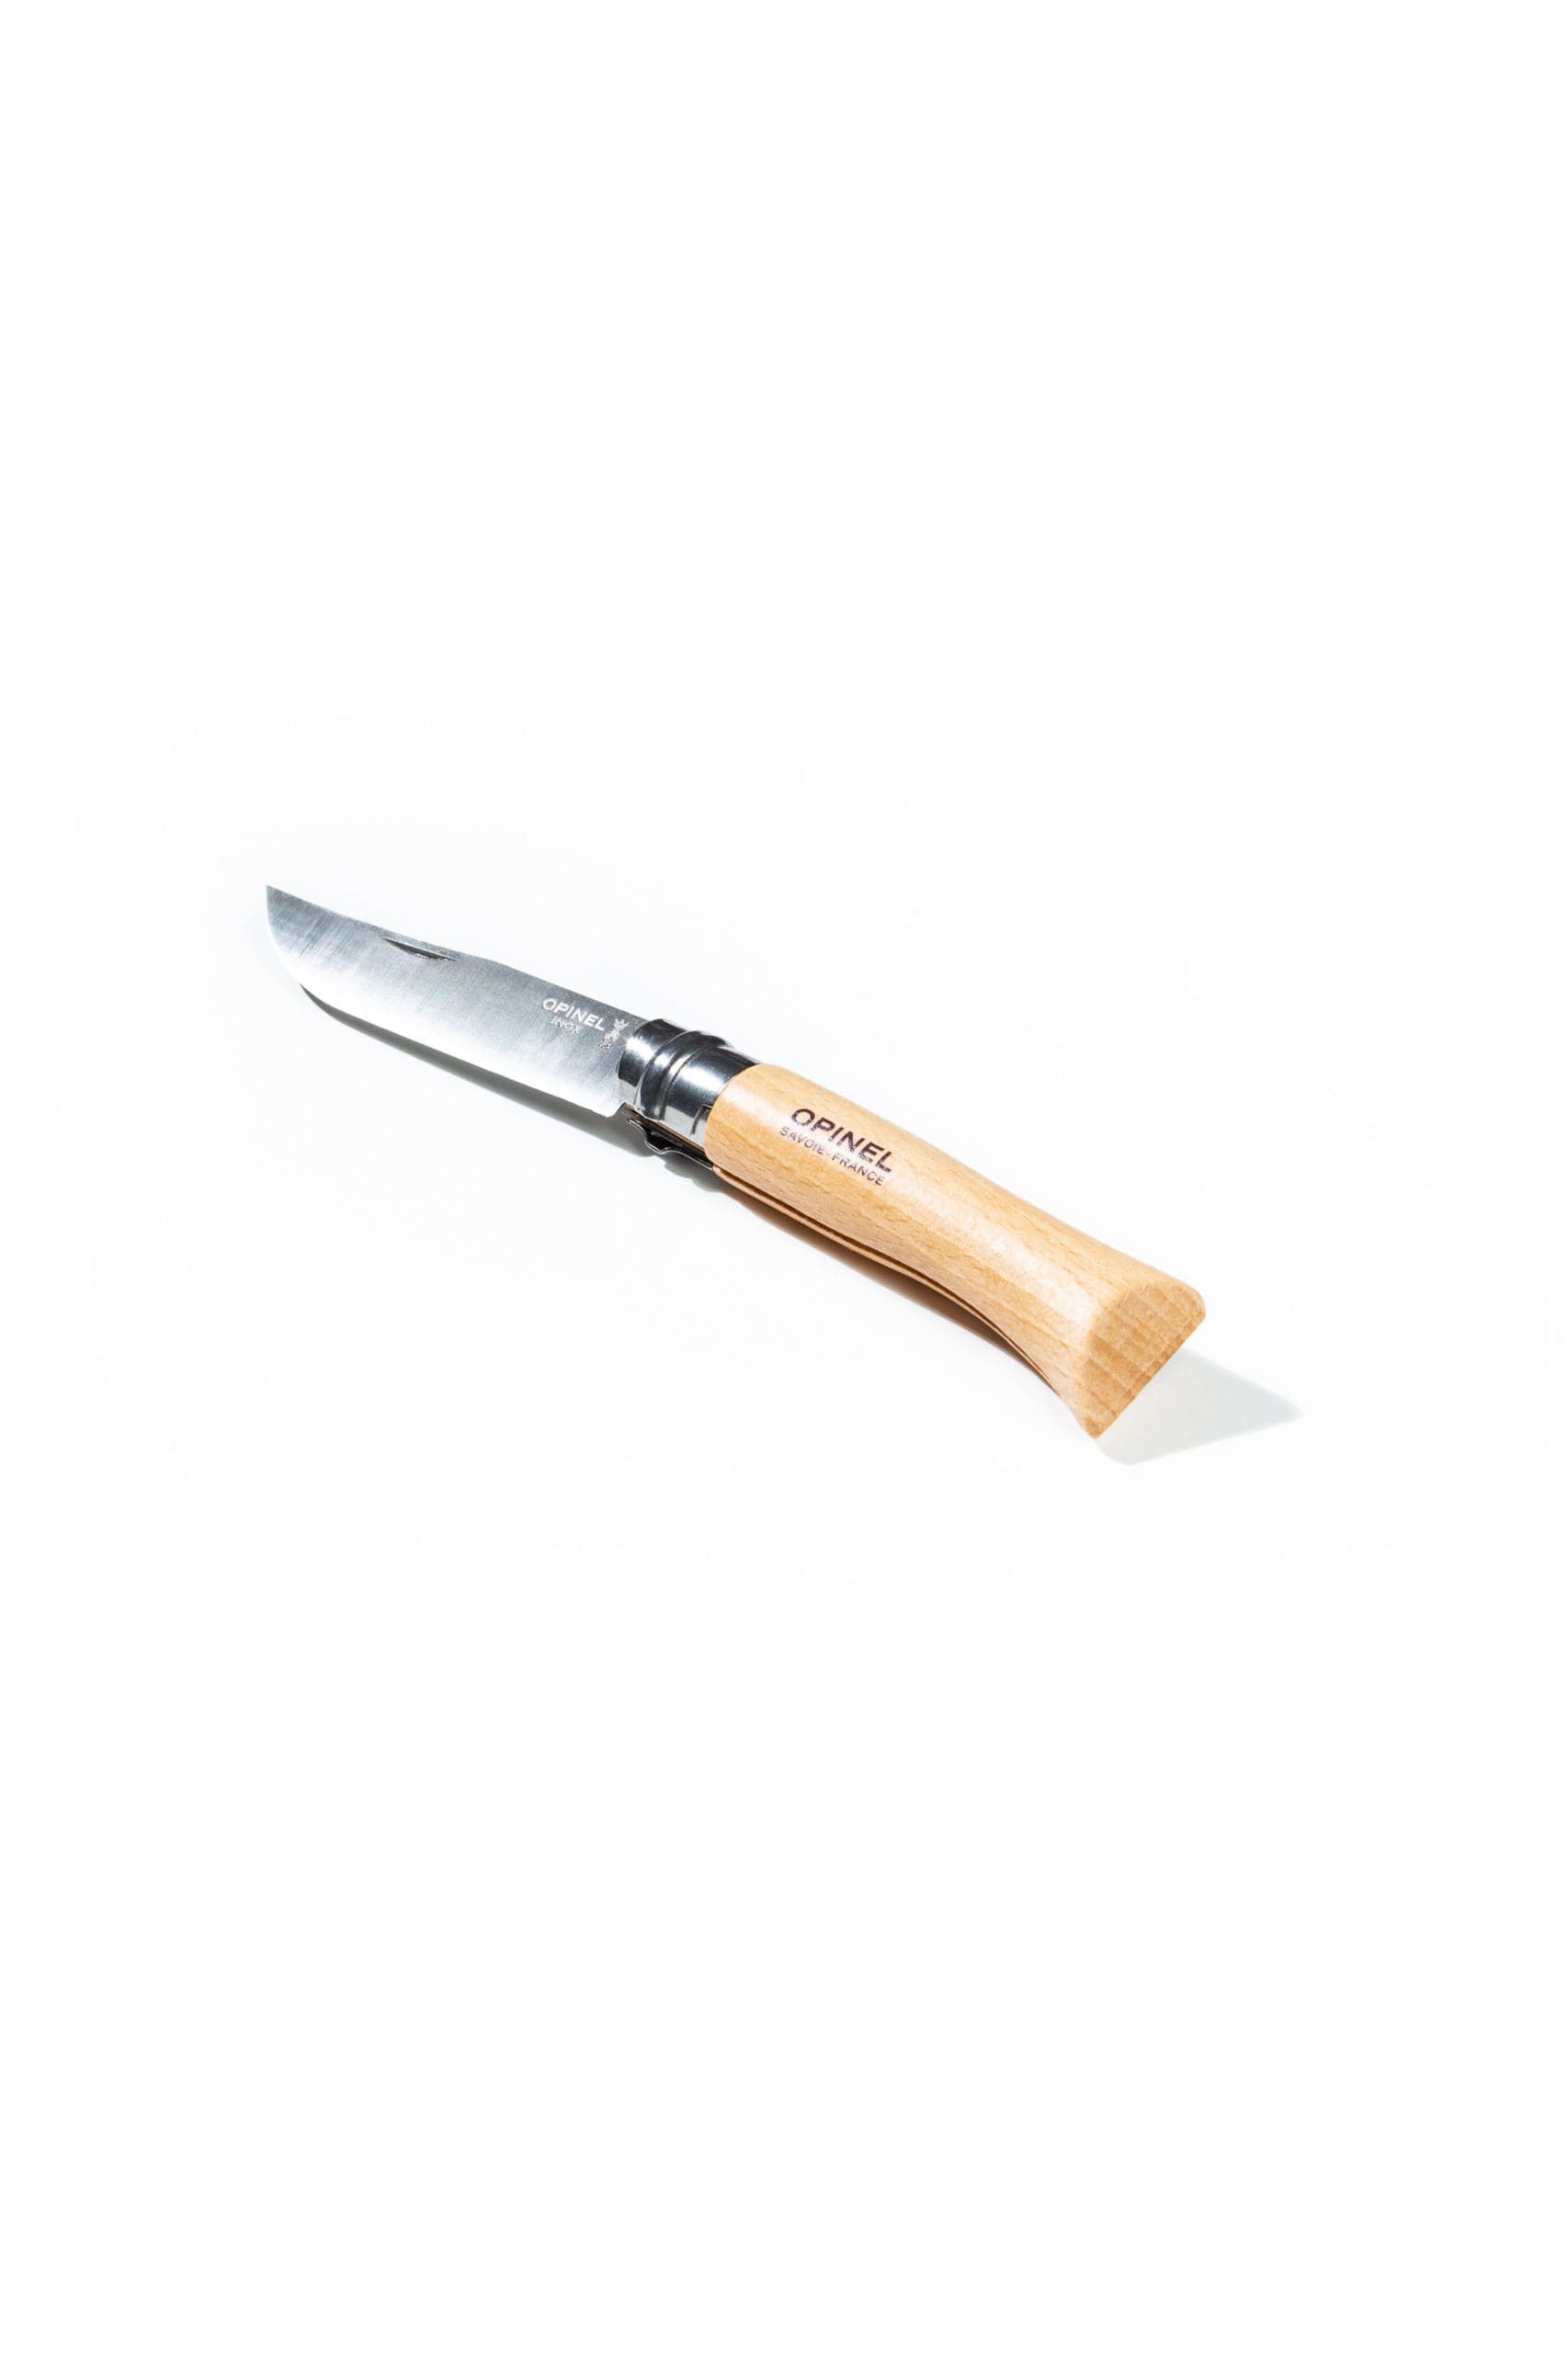 Opinel Knife No. 12 Serrated Blade Inox Stainless Steel Made in France